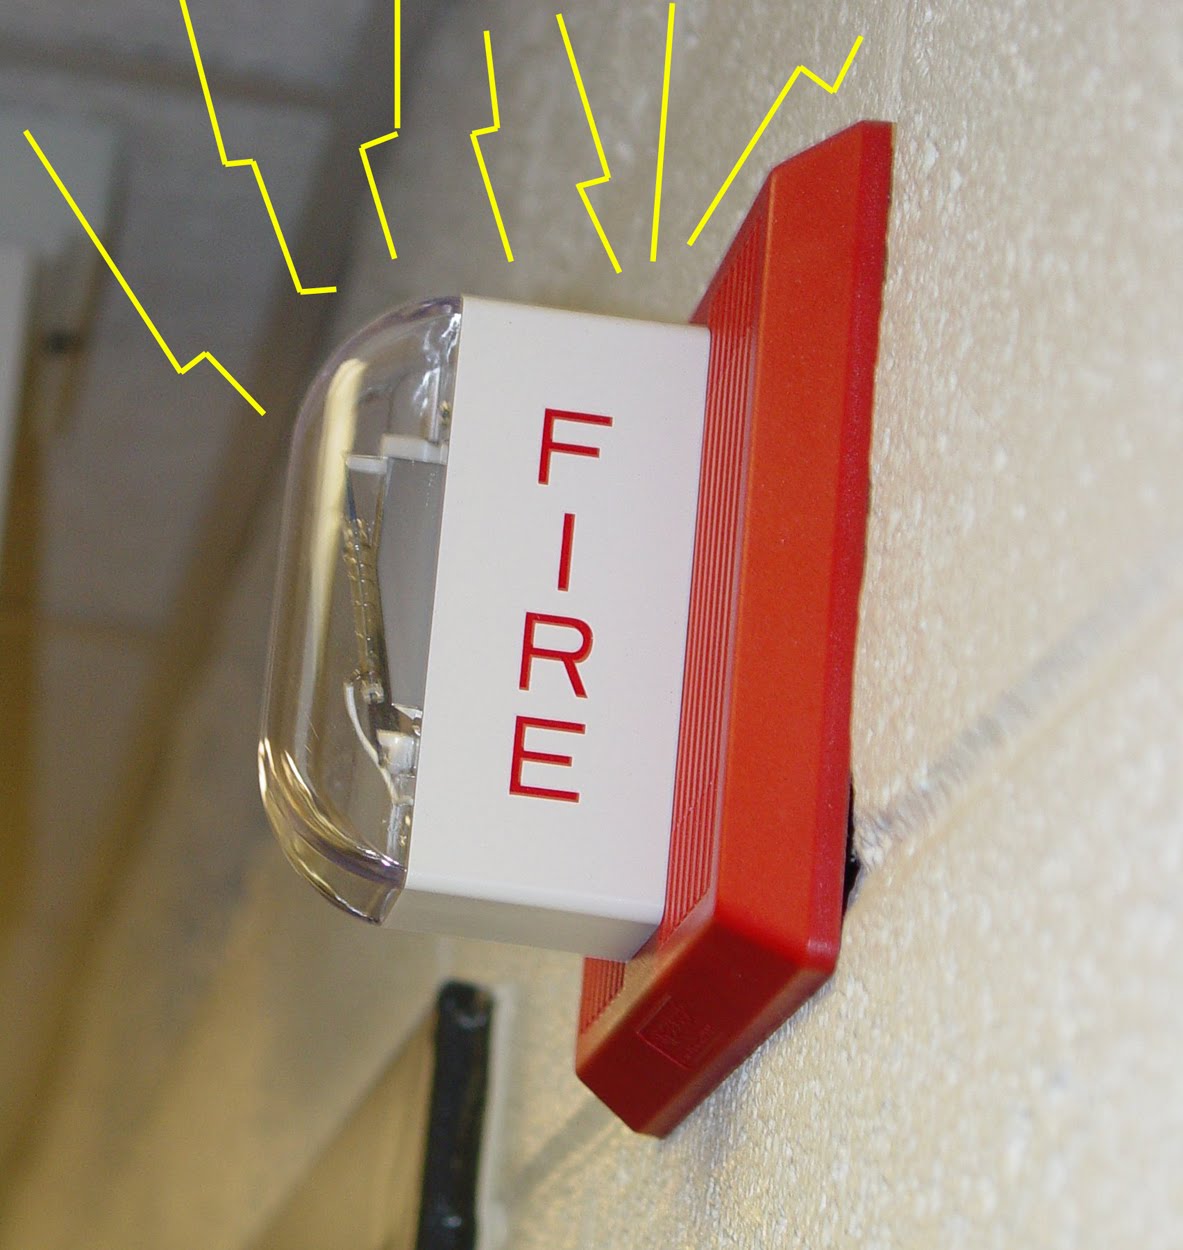 do not paint fire alarm device